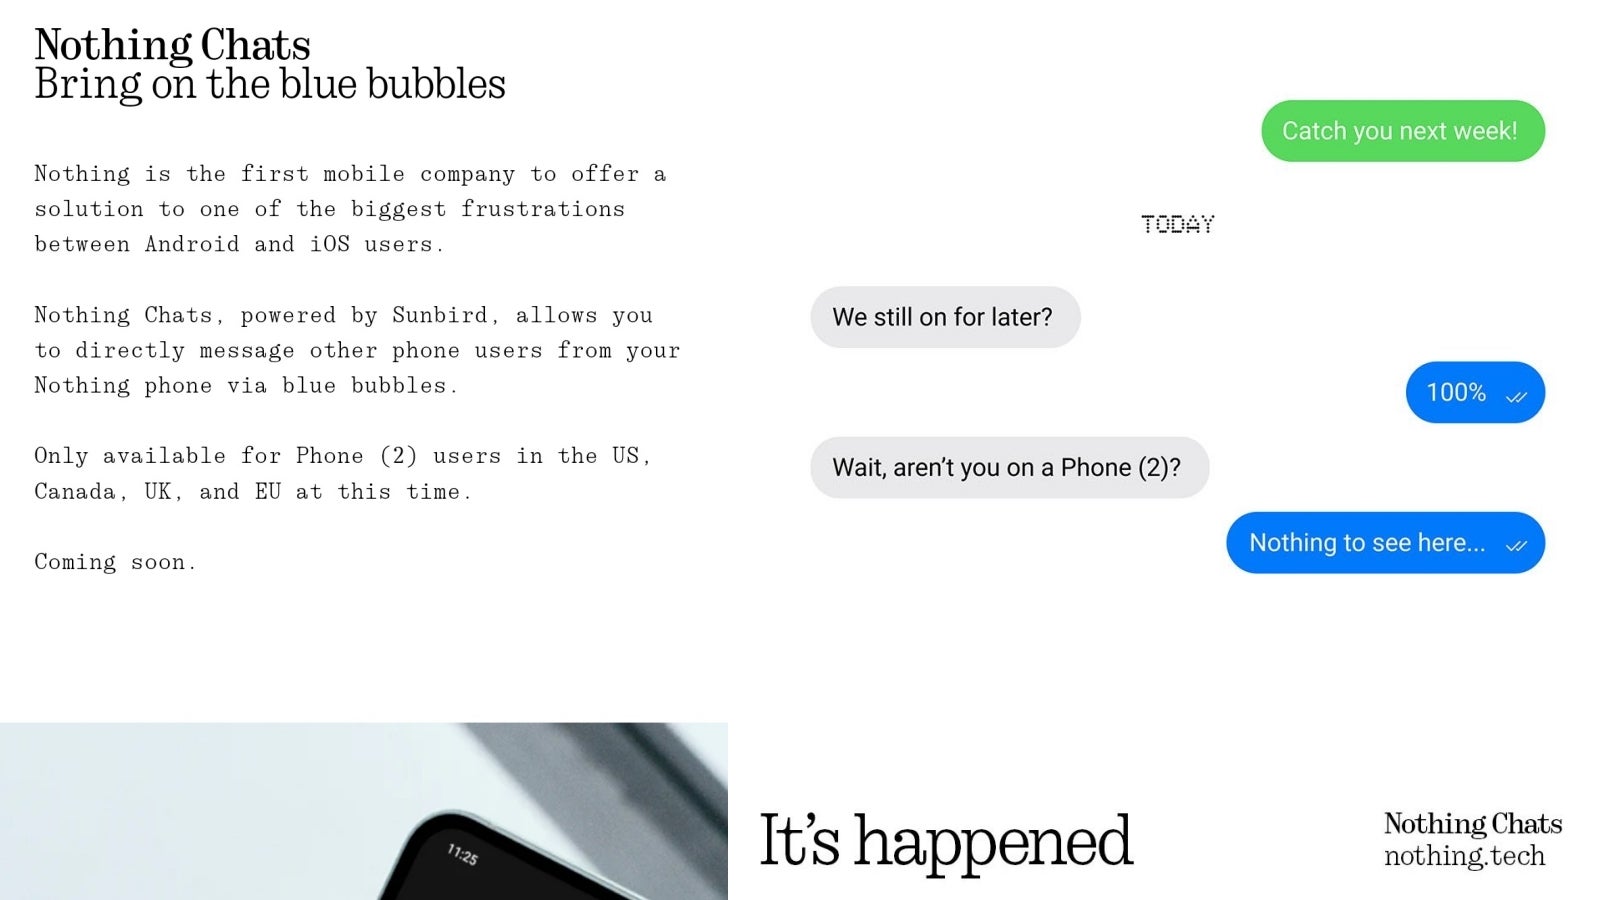 Sorry, America! iMessage coming to Android won’t solve the real problem: Don’t let Nothing fool you